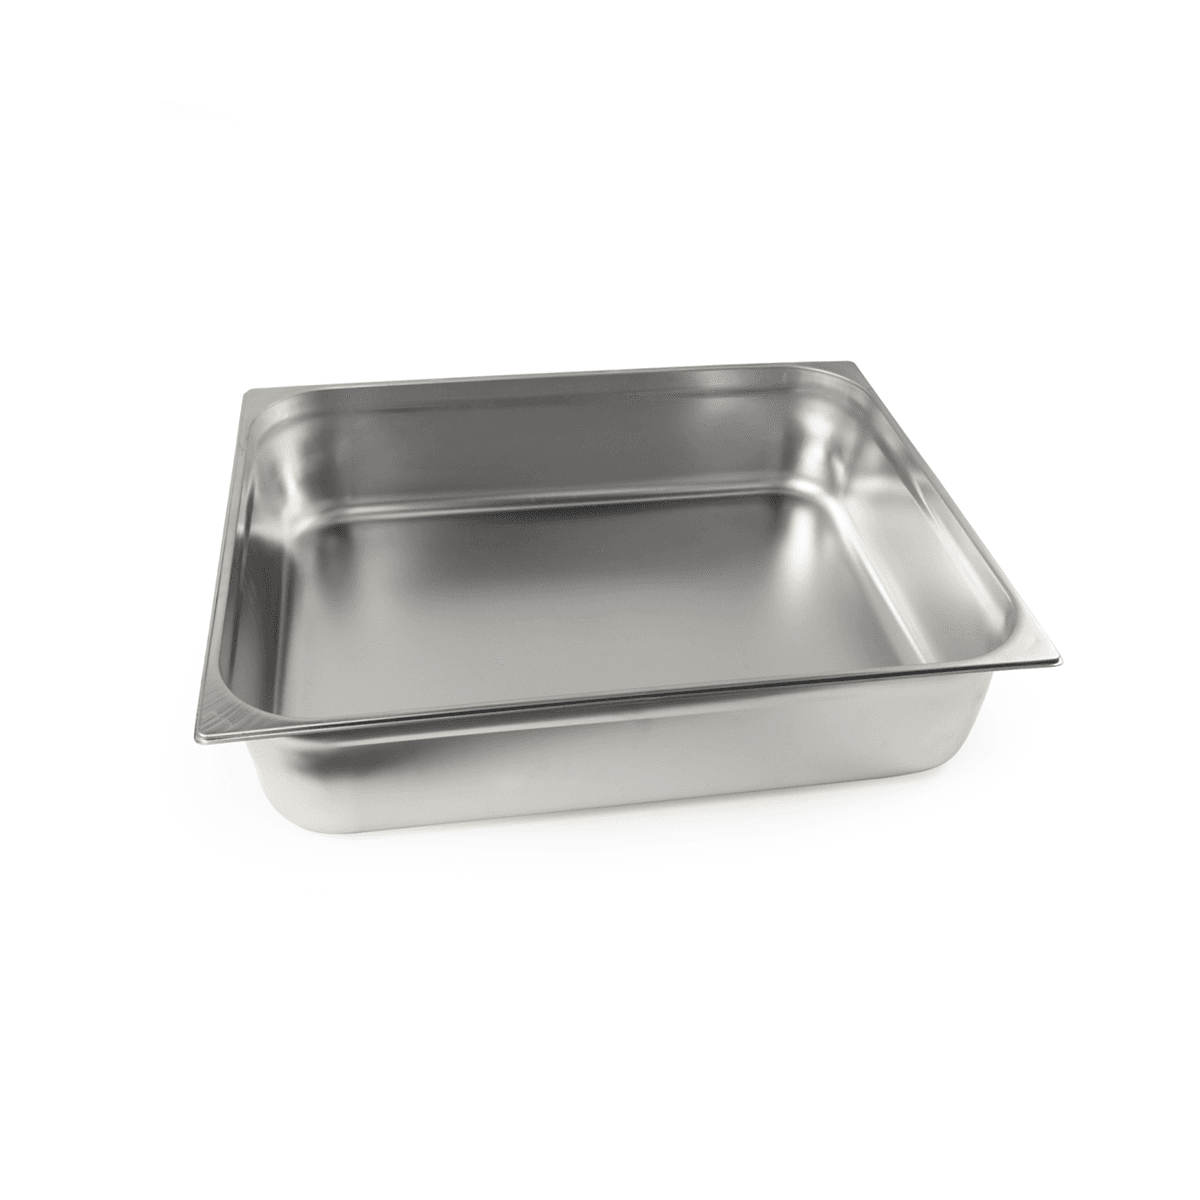 Kayalar Stainless Steel Gastronorm Container GN 2/1-150 mm Silver Stainless Steel